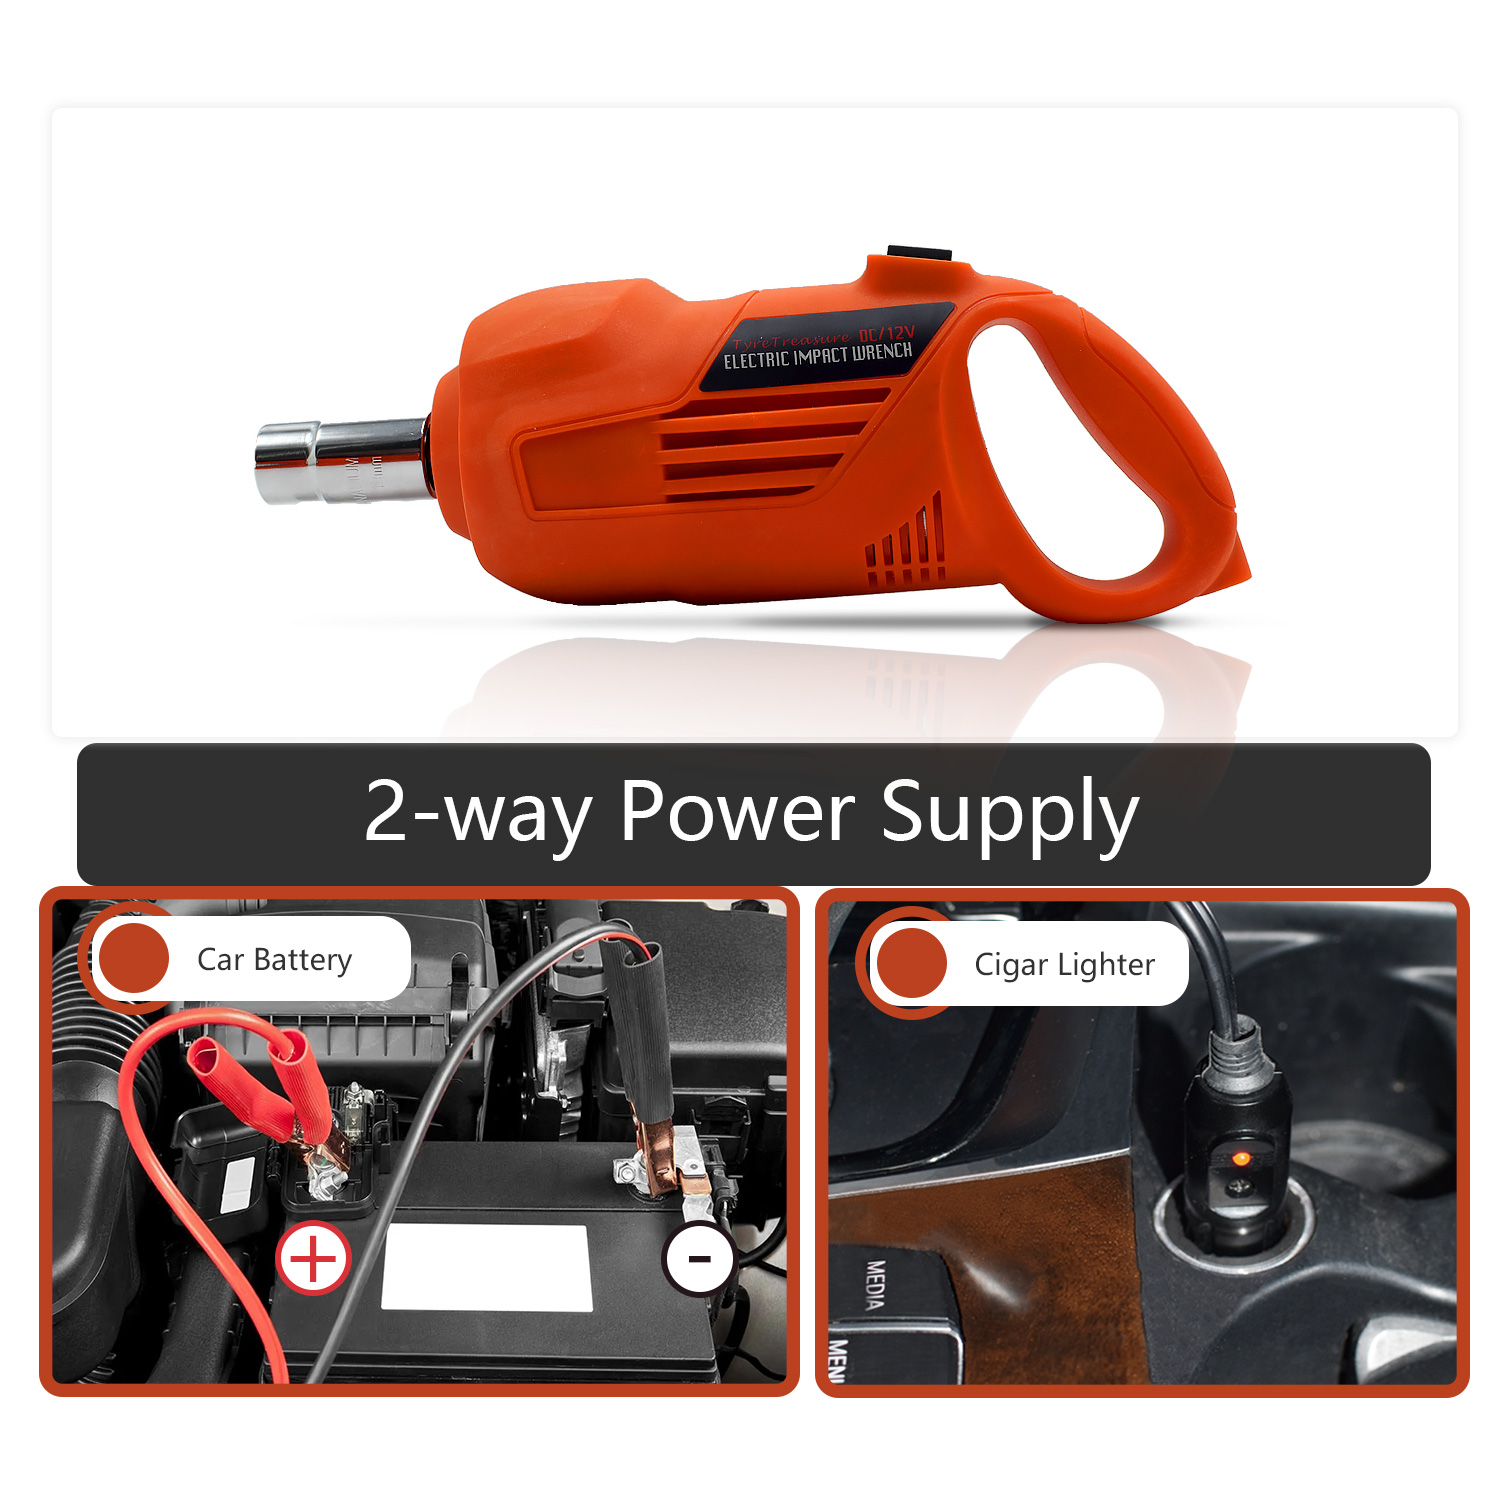 480N.m 1/2" High Strength Motor DC12V Electric Impact Wrench with 4 Sleeve sizes 17/19/21/23cm